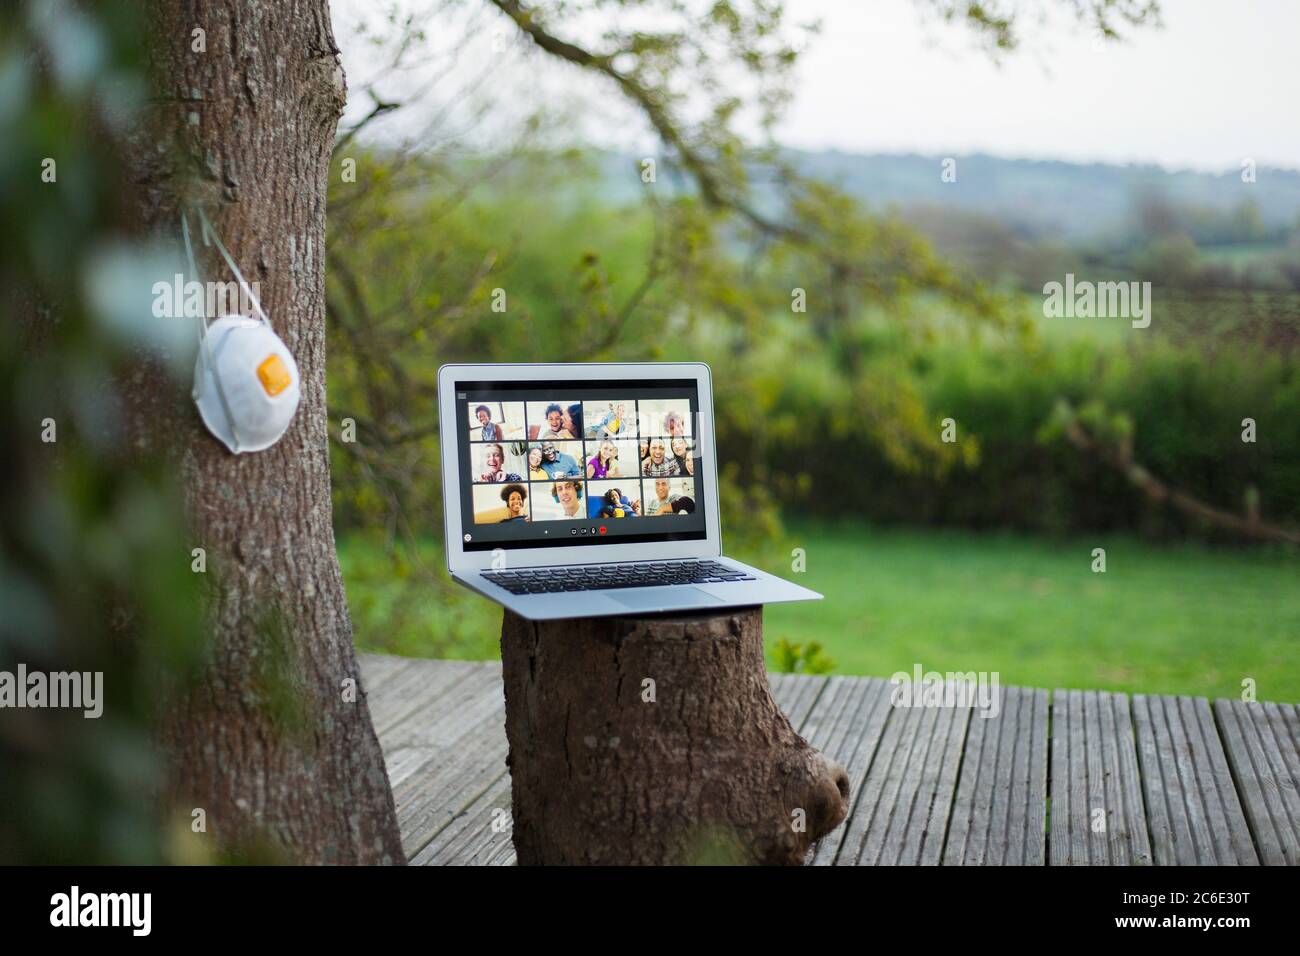 Face mask hanging next to video chat on laptop screen on balcony Stock Photo